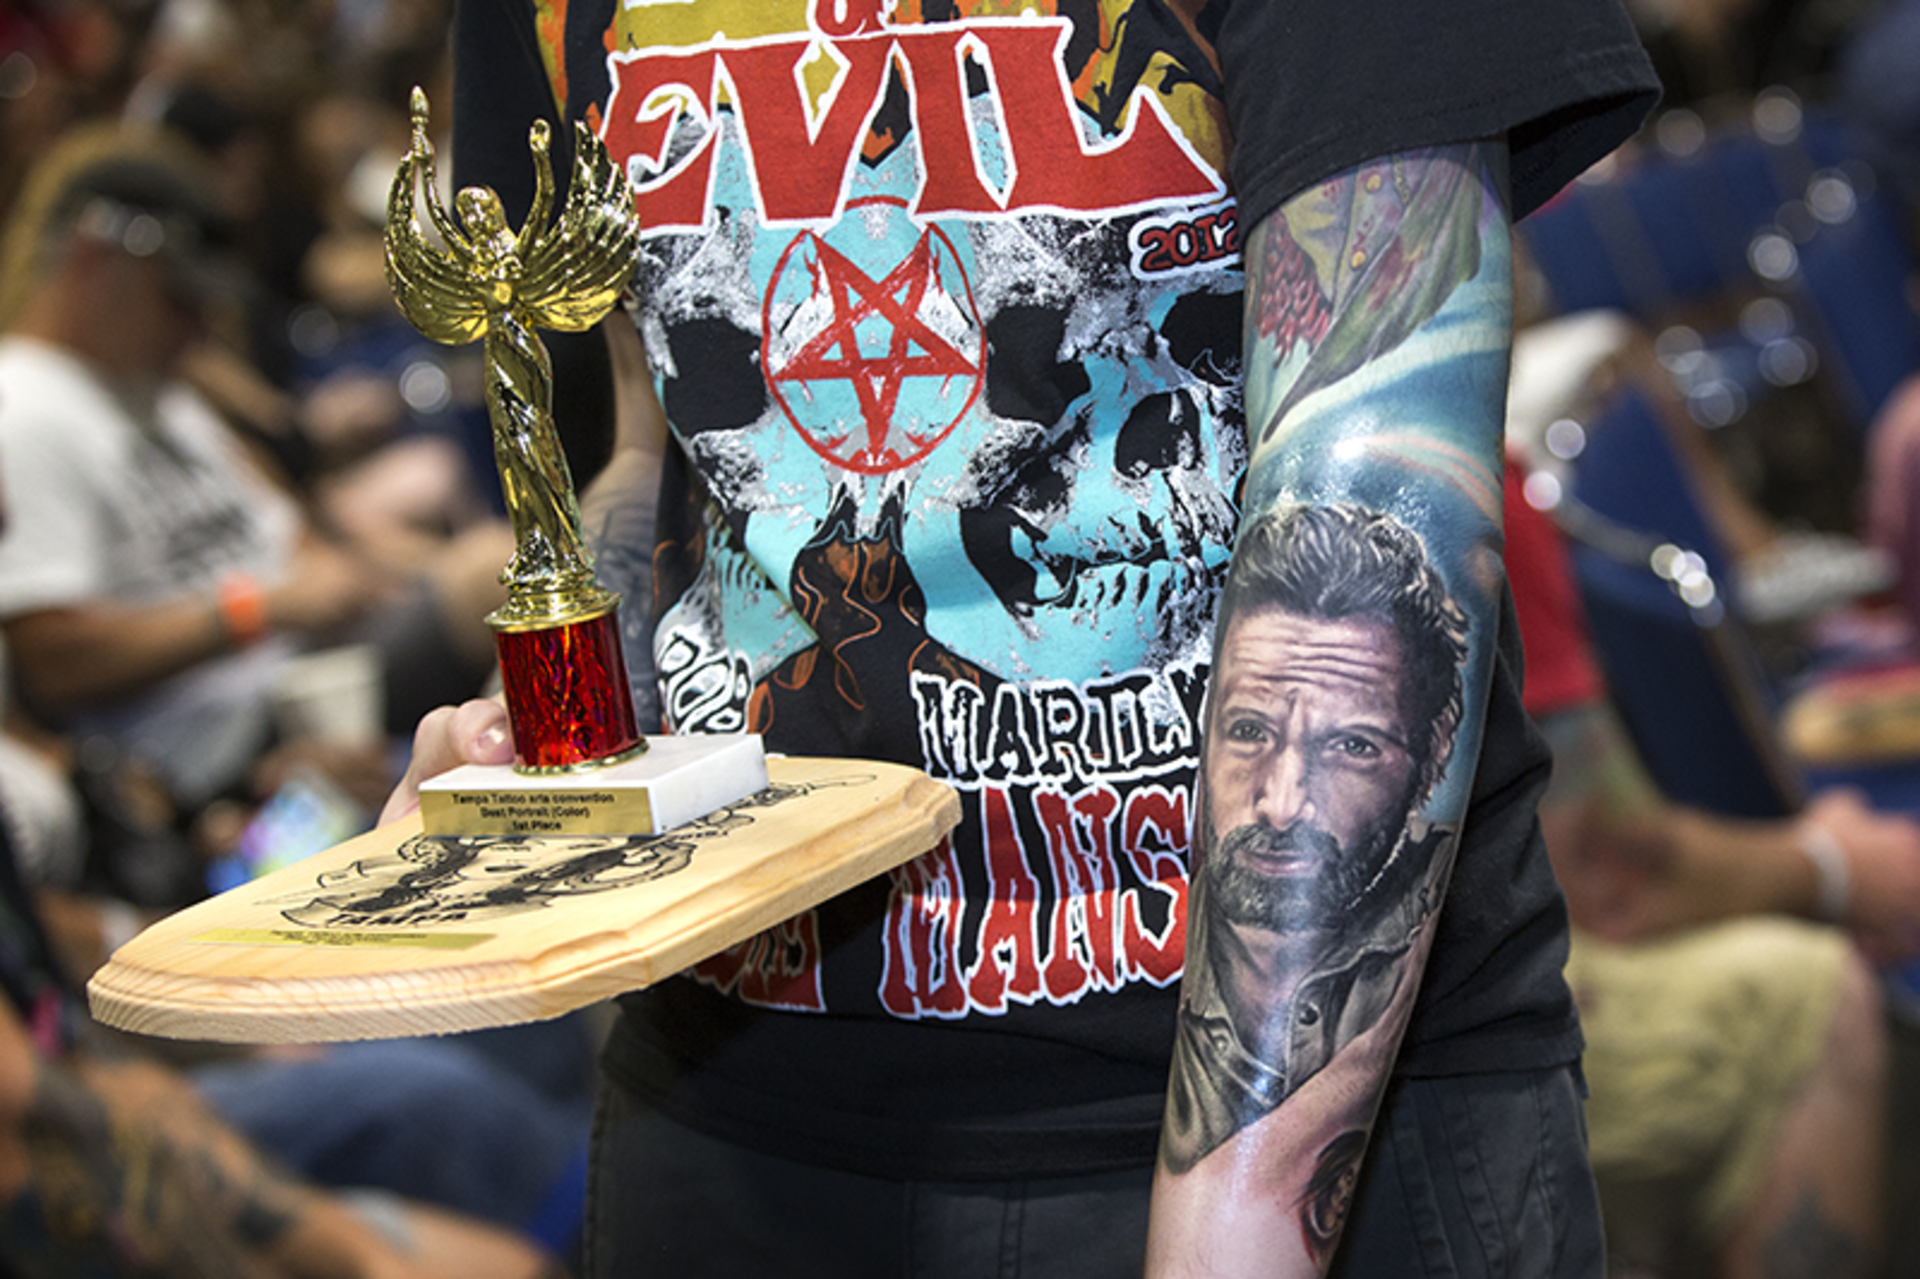 Tattoo Tattoo Arts Convention needles its way into downtown Tampa